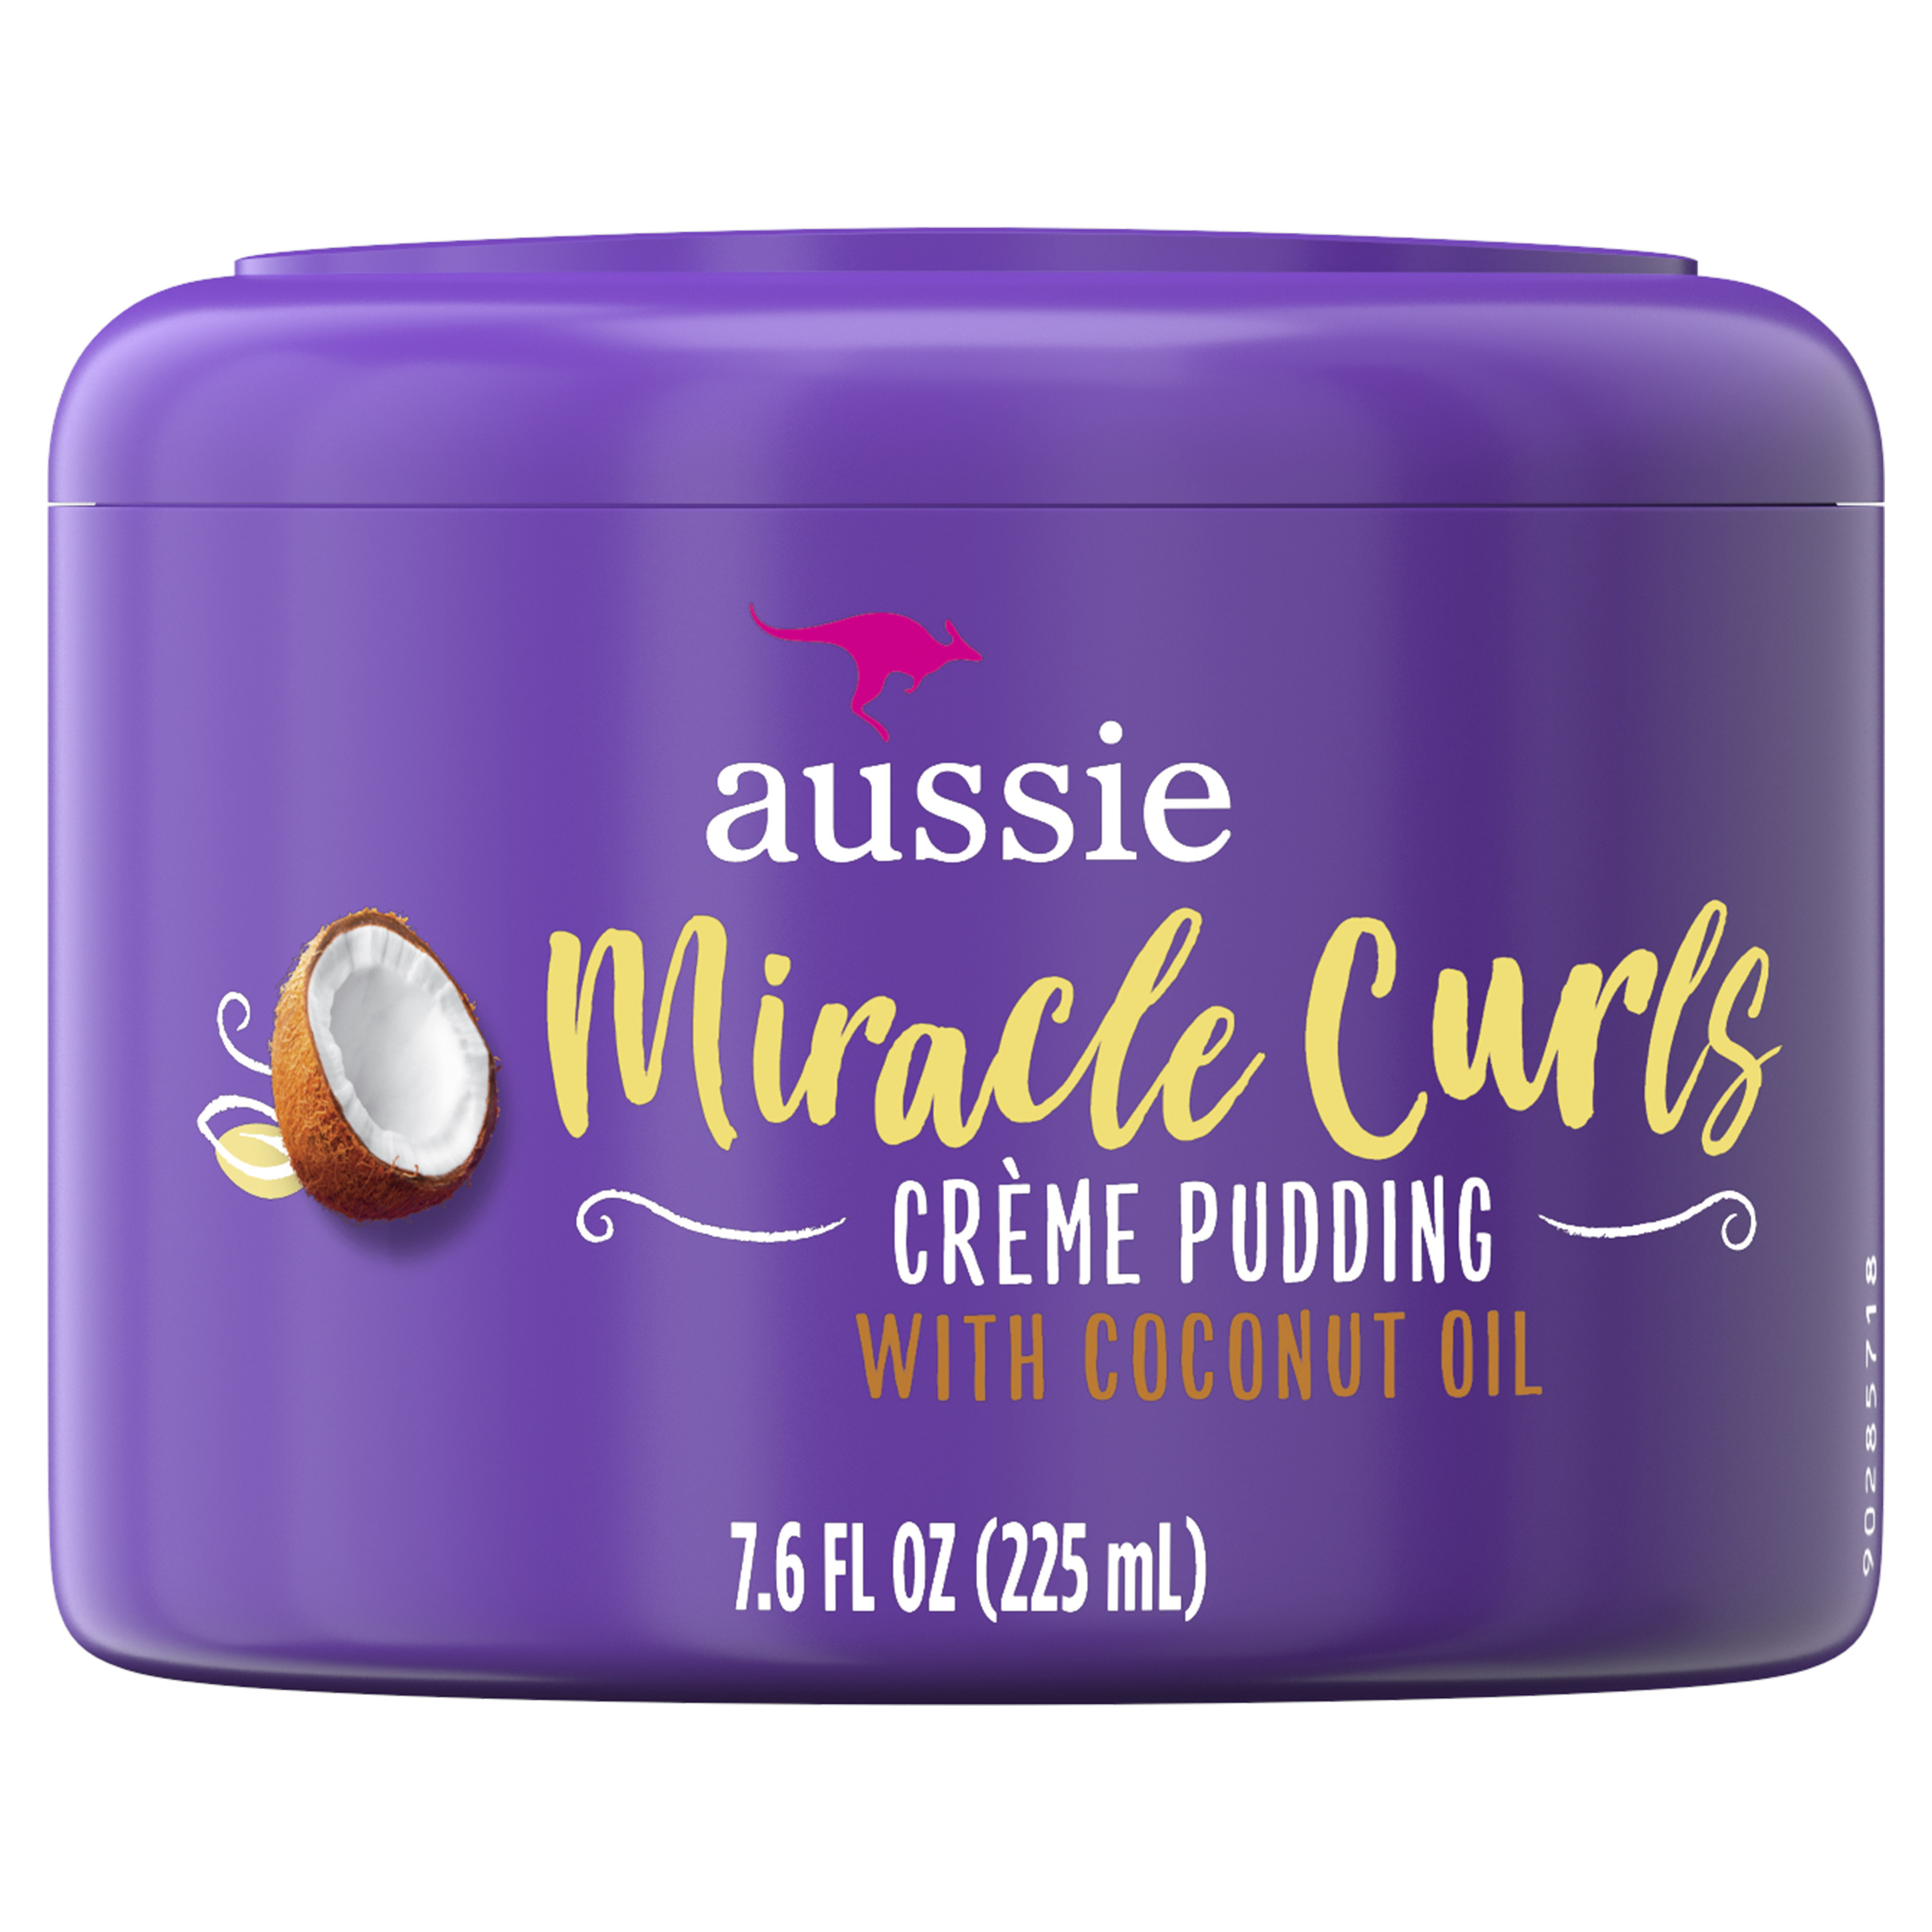 Aussie Miracle Curls with Coconut Oil, Paraben Free Cream Pudding, for Curly Hair 7.6 fl oz - image 1 of 11